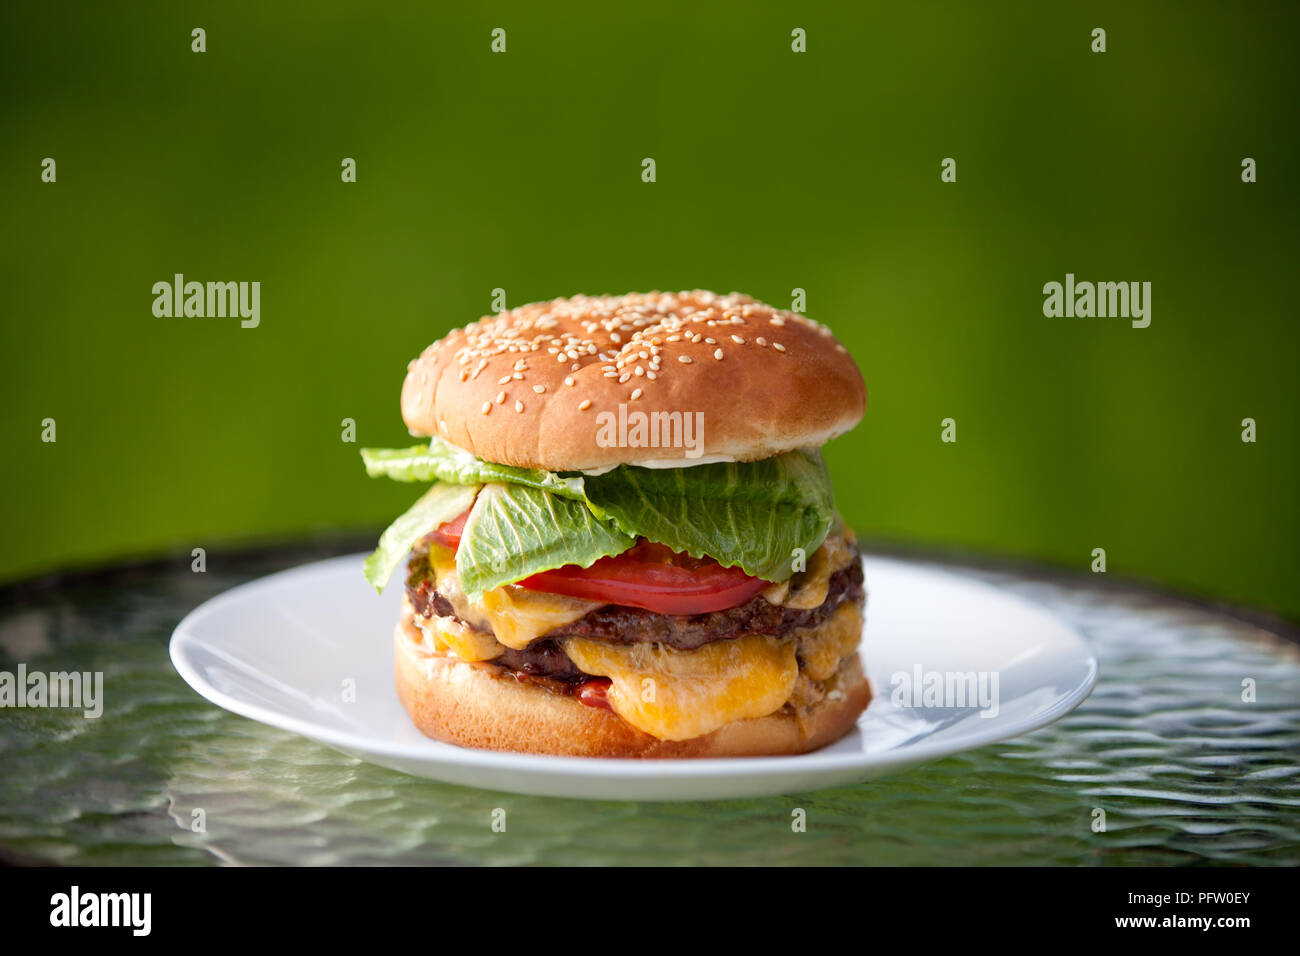 Big Cheeseburger with melted cheese and sesame bun Stock Photo